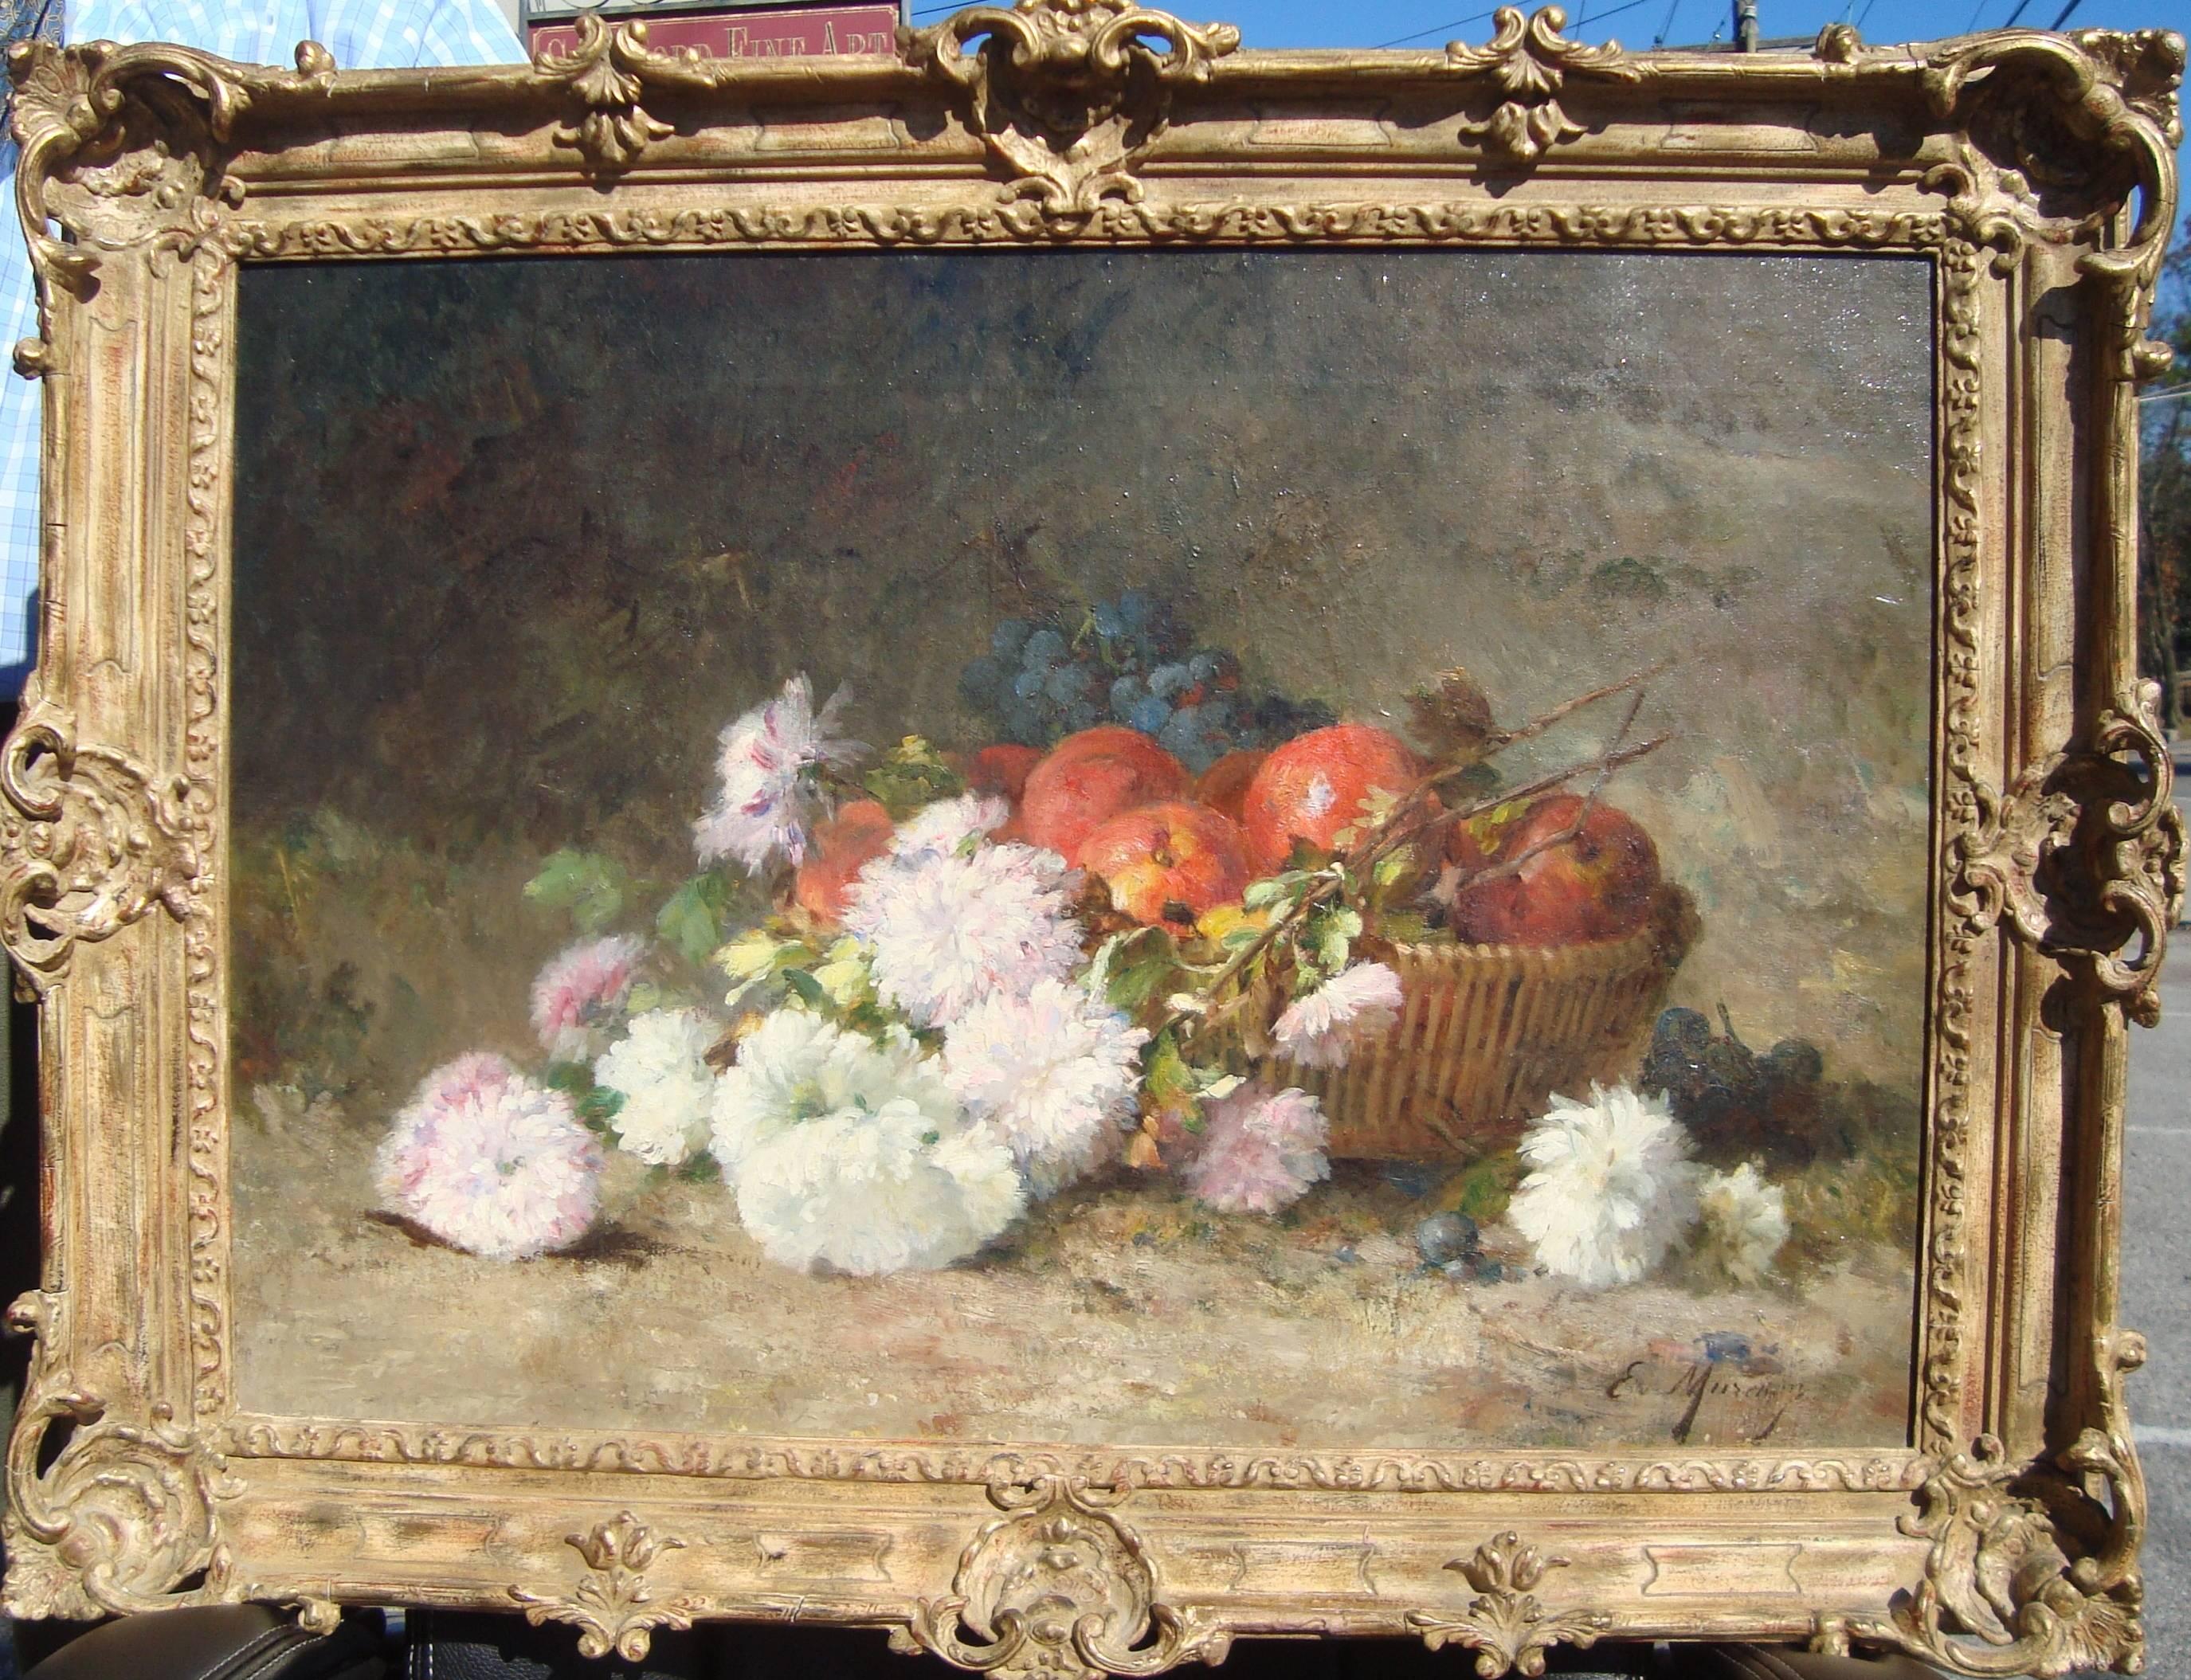 Chrysanthemums and fruit in a basket - Painting by Euphemie Muraton